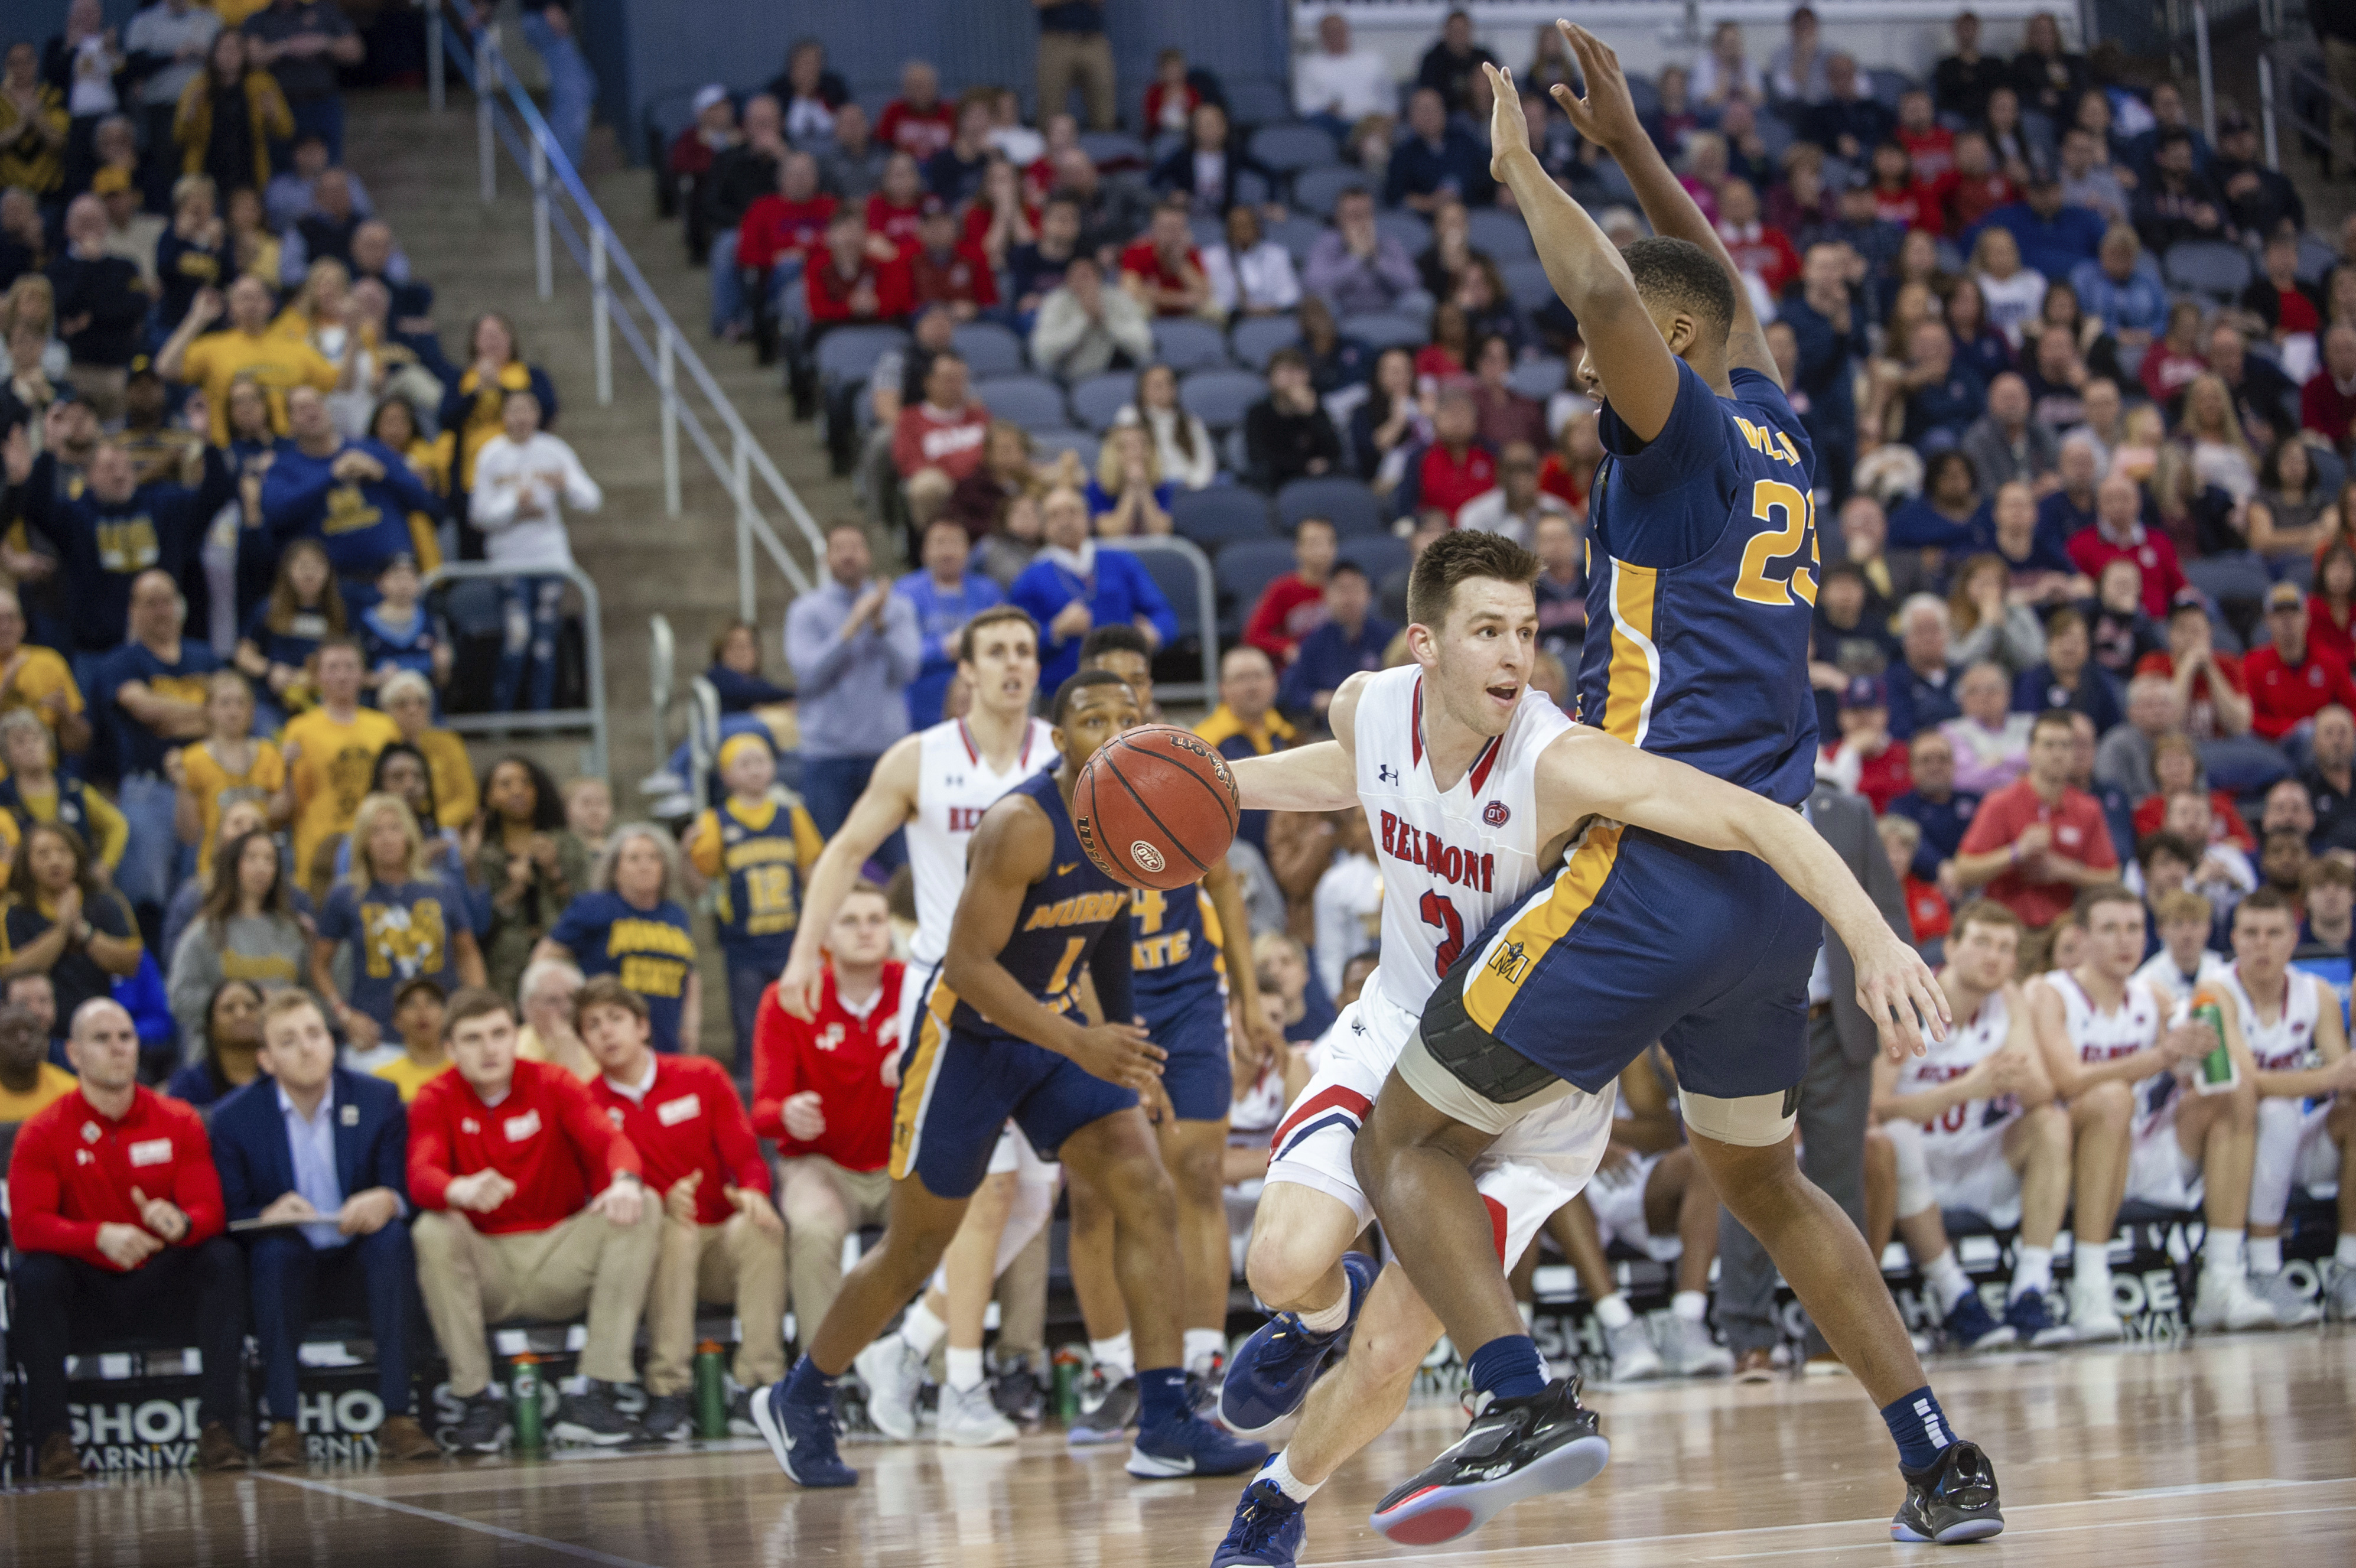 Scanlon's shot sends Belmont past Murray State for OVC title